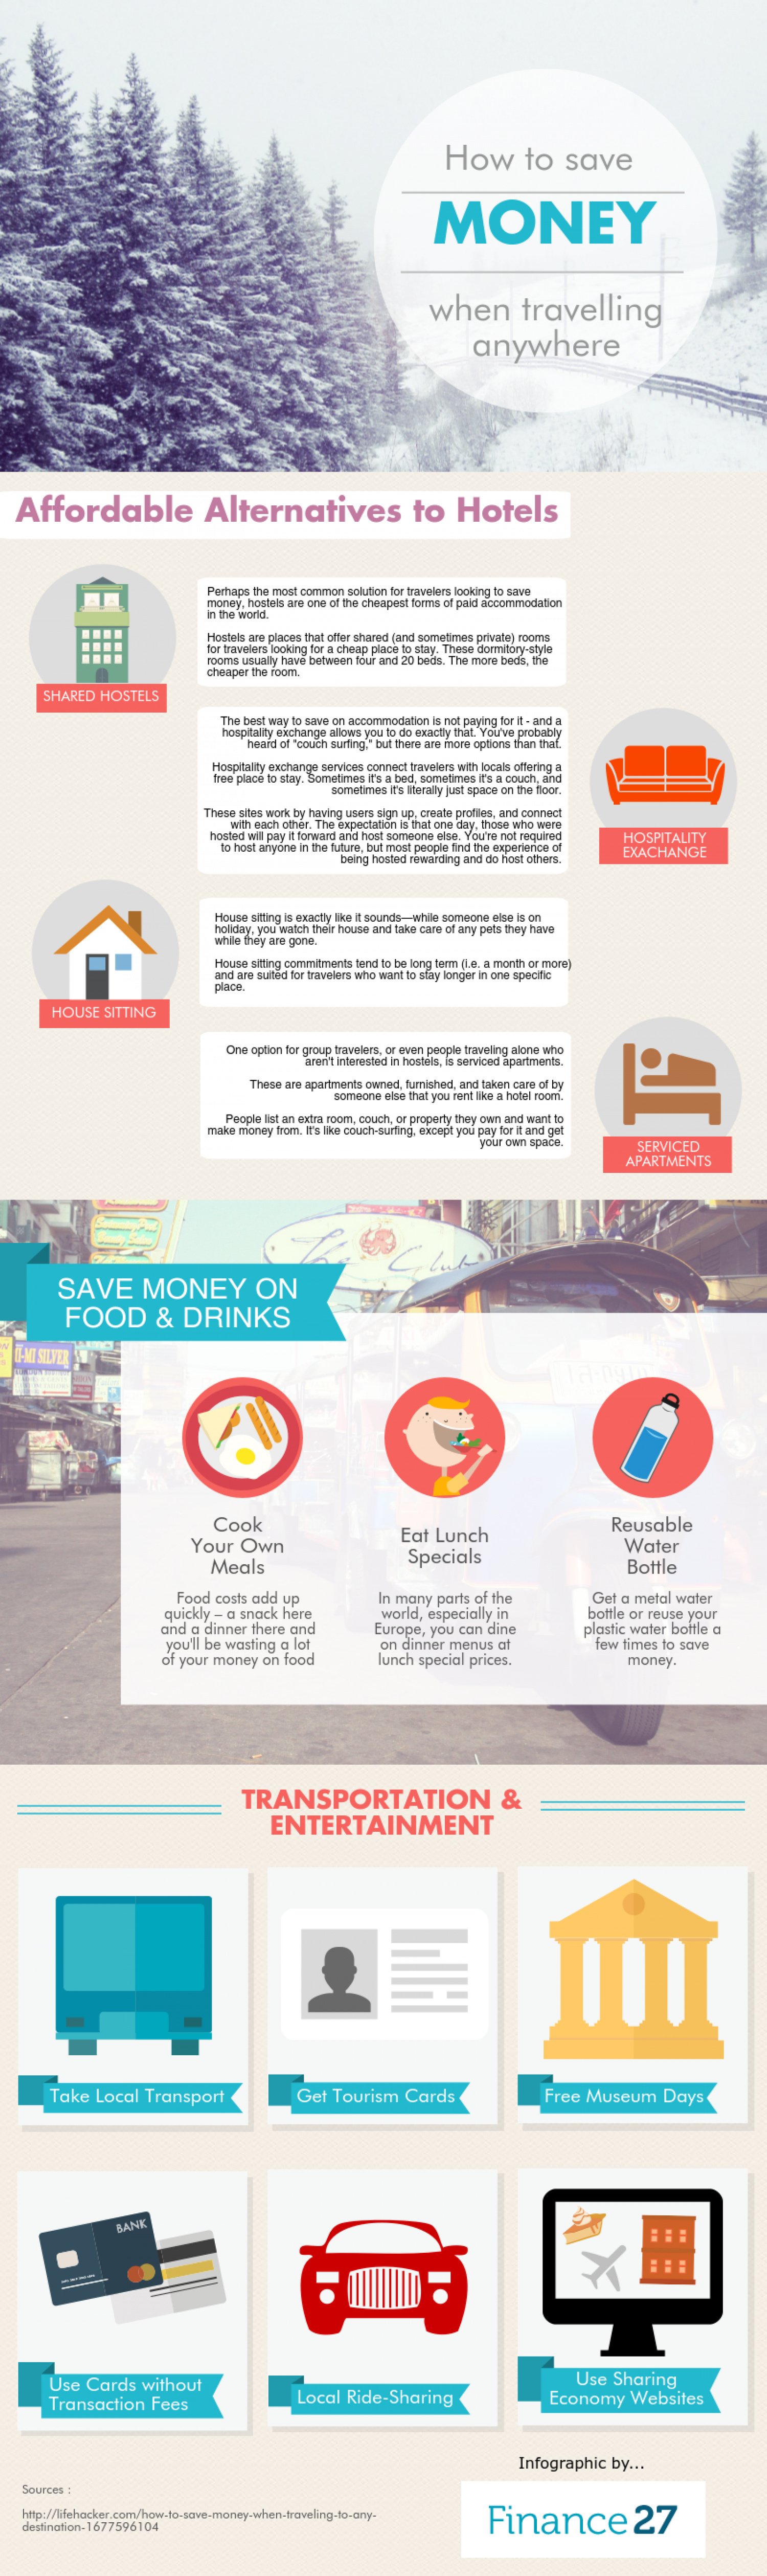 How To Save Money When Travelling Infographic